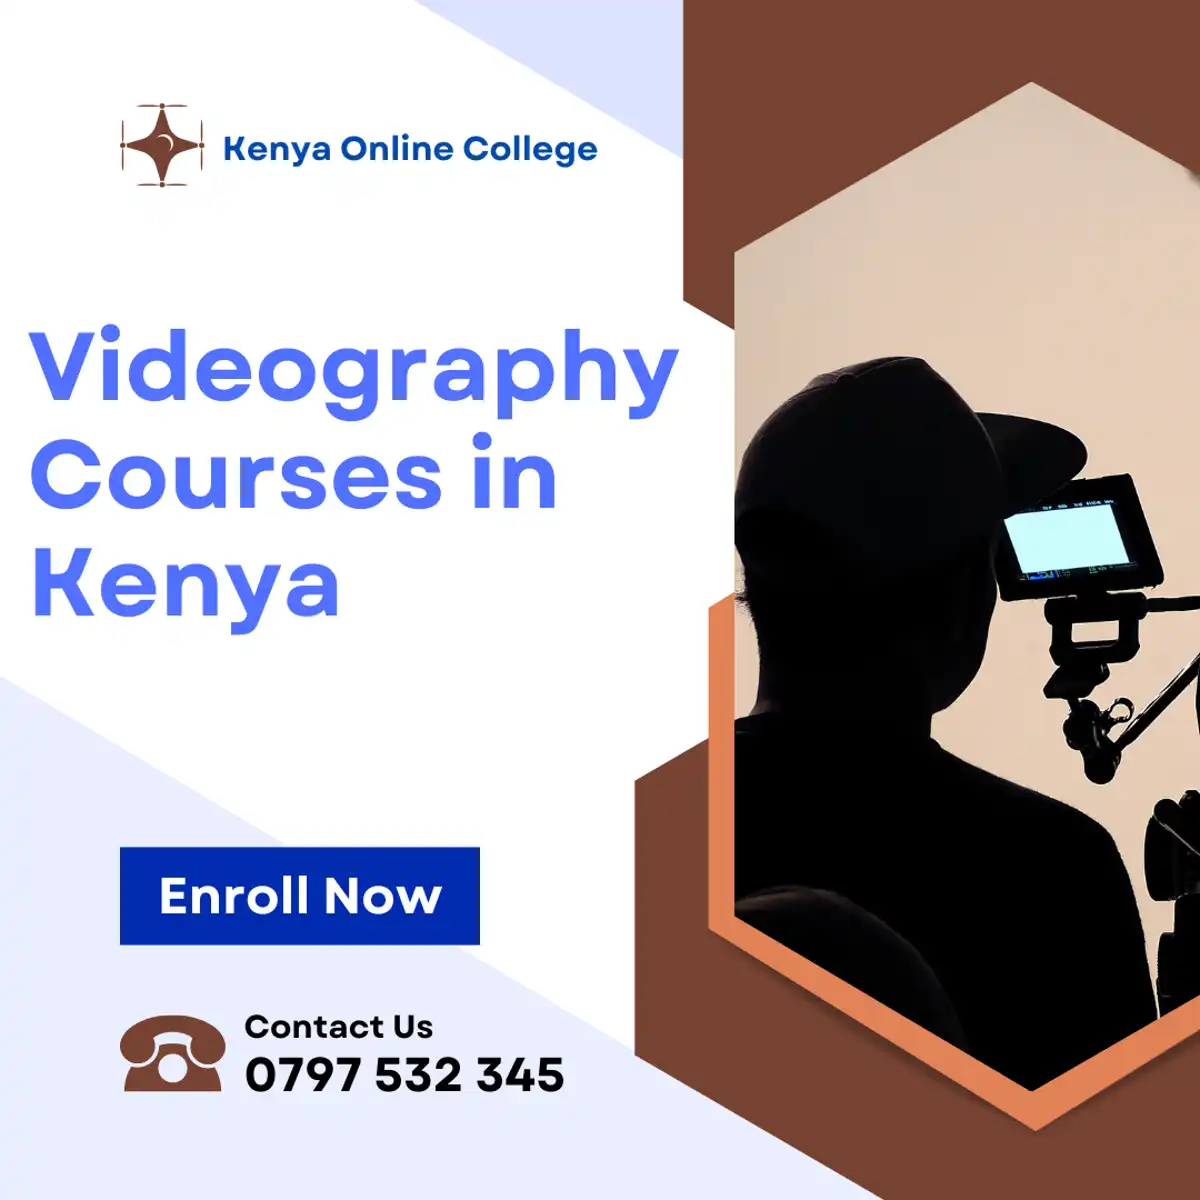 Videography Courses in Kenya